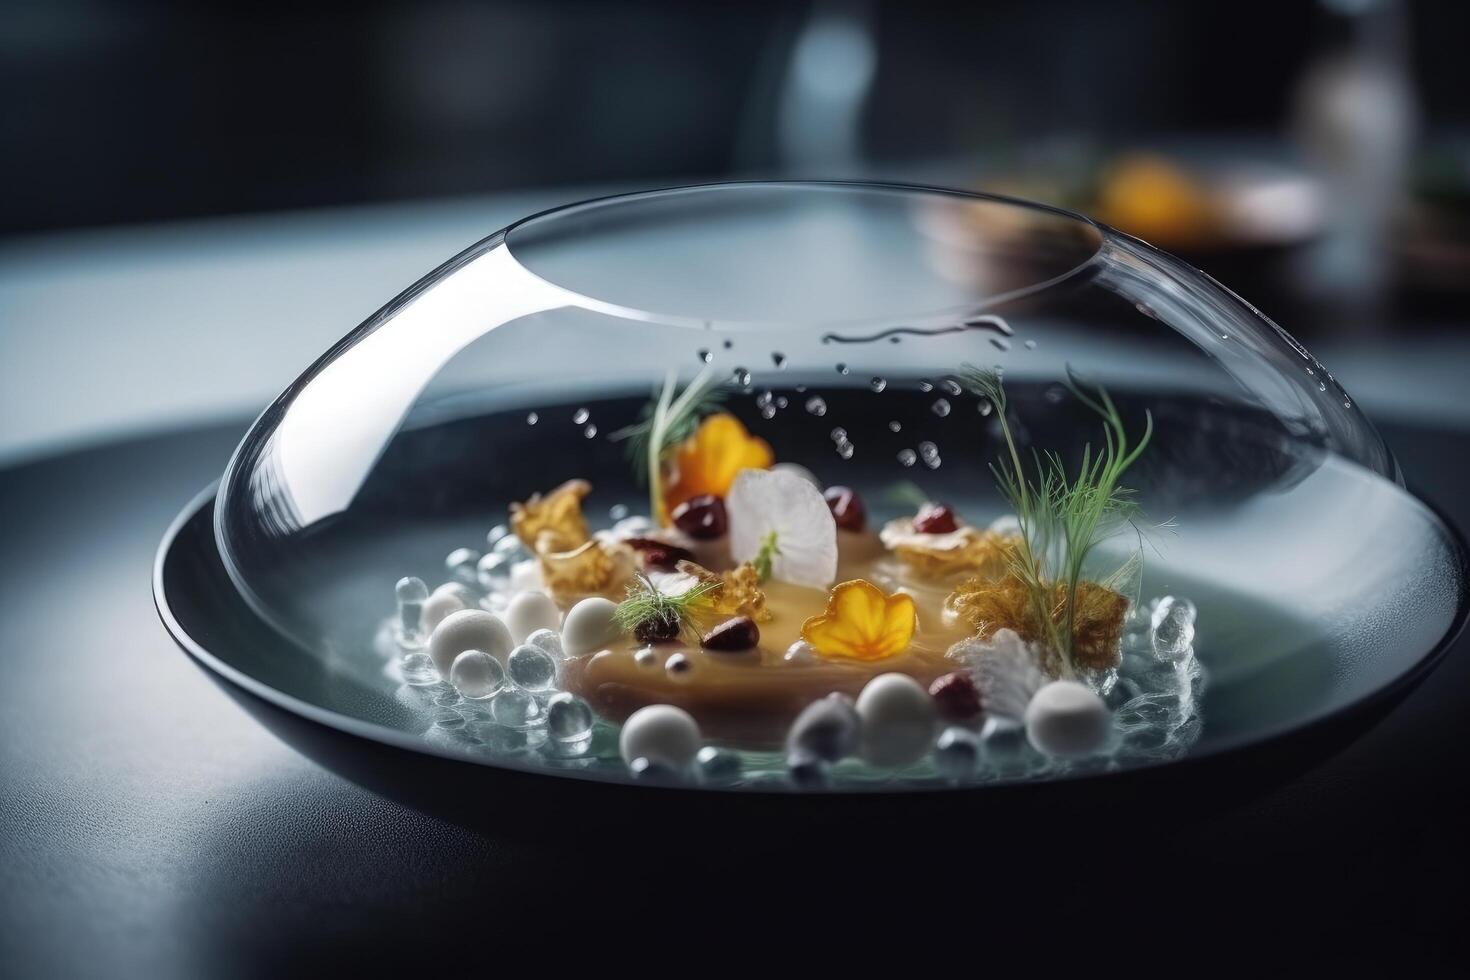 Delicious fish soup in a glass bowl on a black background. Michelin Star quality food dish close up view, photo